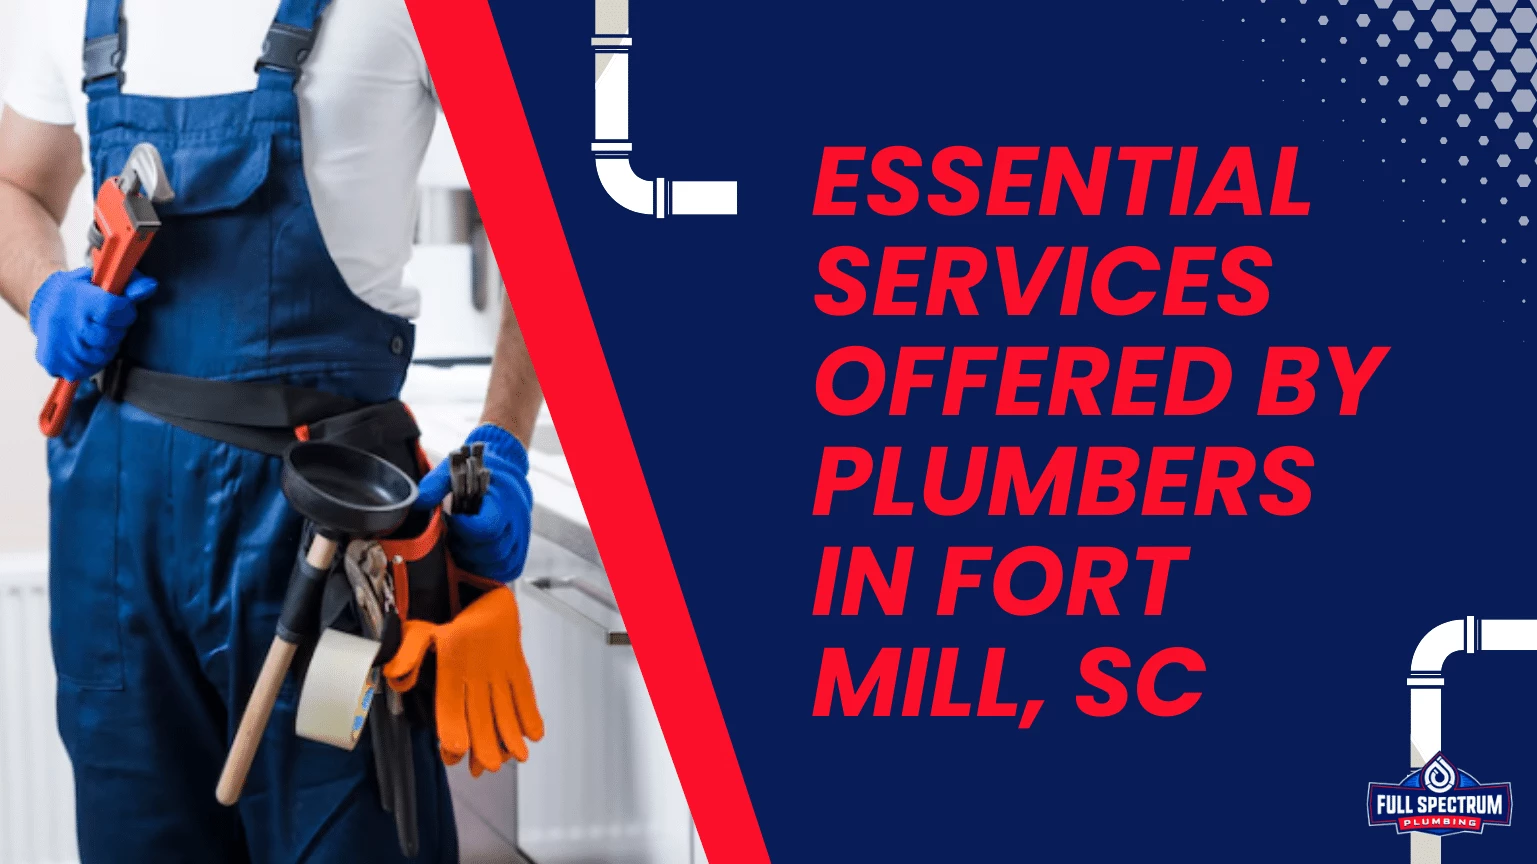 Essential Services Offered by Plumbers in Fort Mill, SC